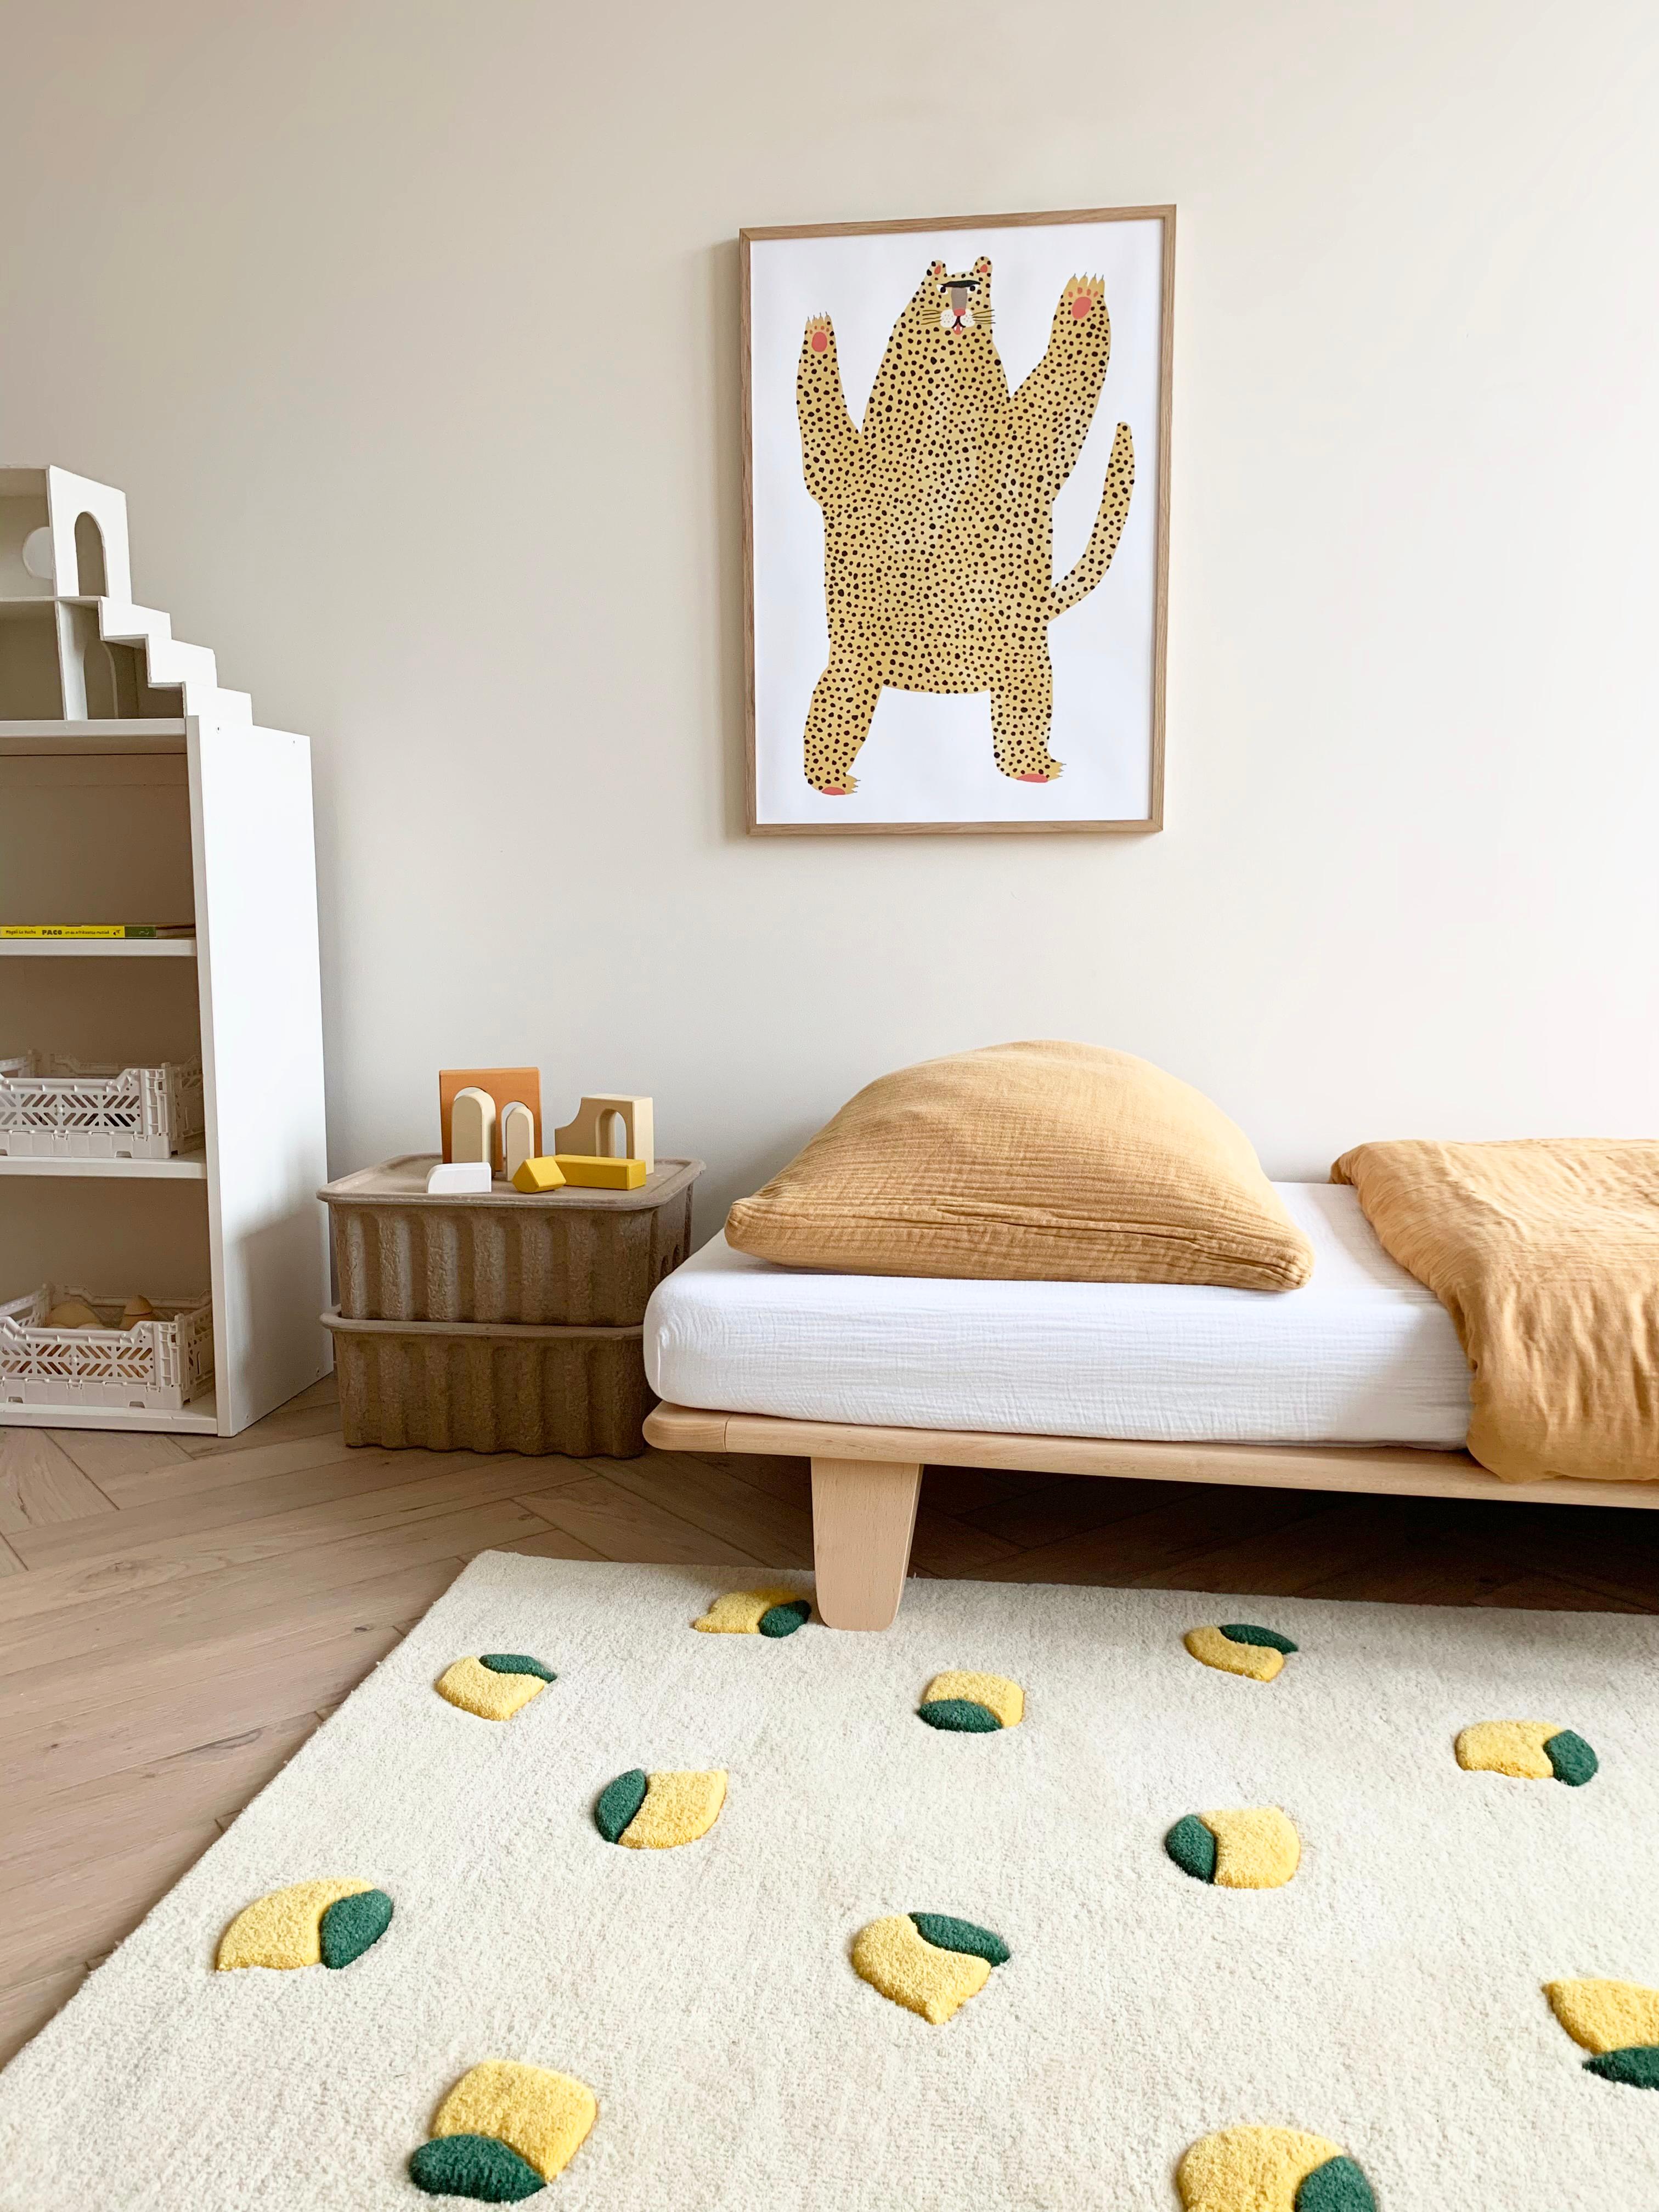 The Lemons Rug is a bold rectangle rug with striking colors. The all over lemon print is hand-tufted in a higher pile to create a 3D lemon texture. This playful rug is handmade of 100% New Zealand wool, that makes it super-soft underfoot.

The